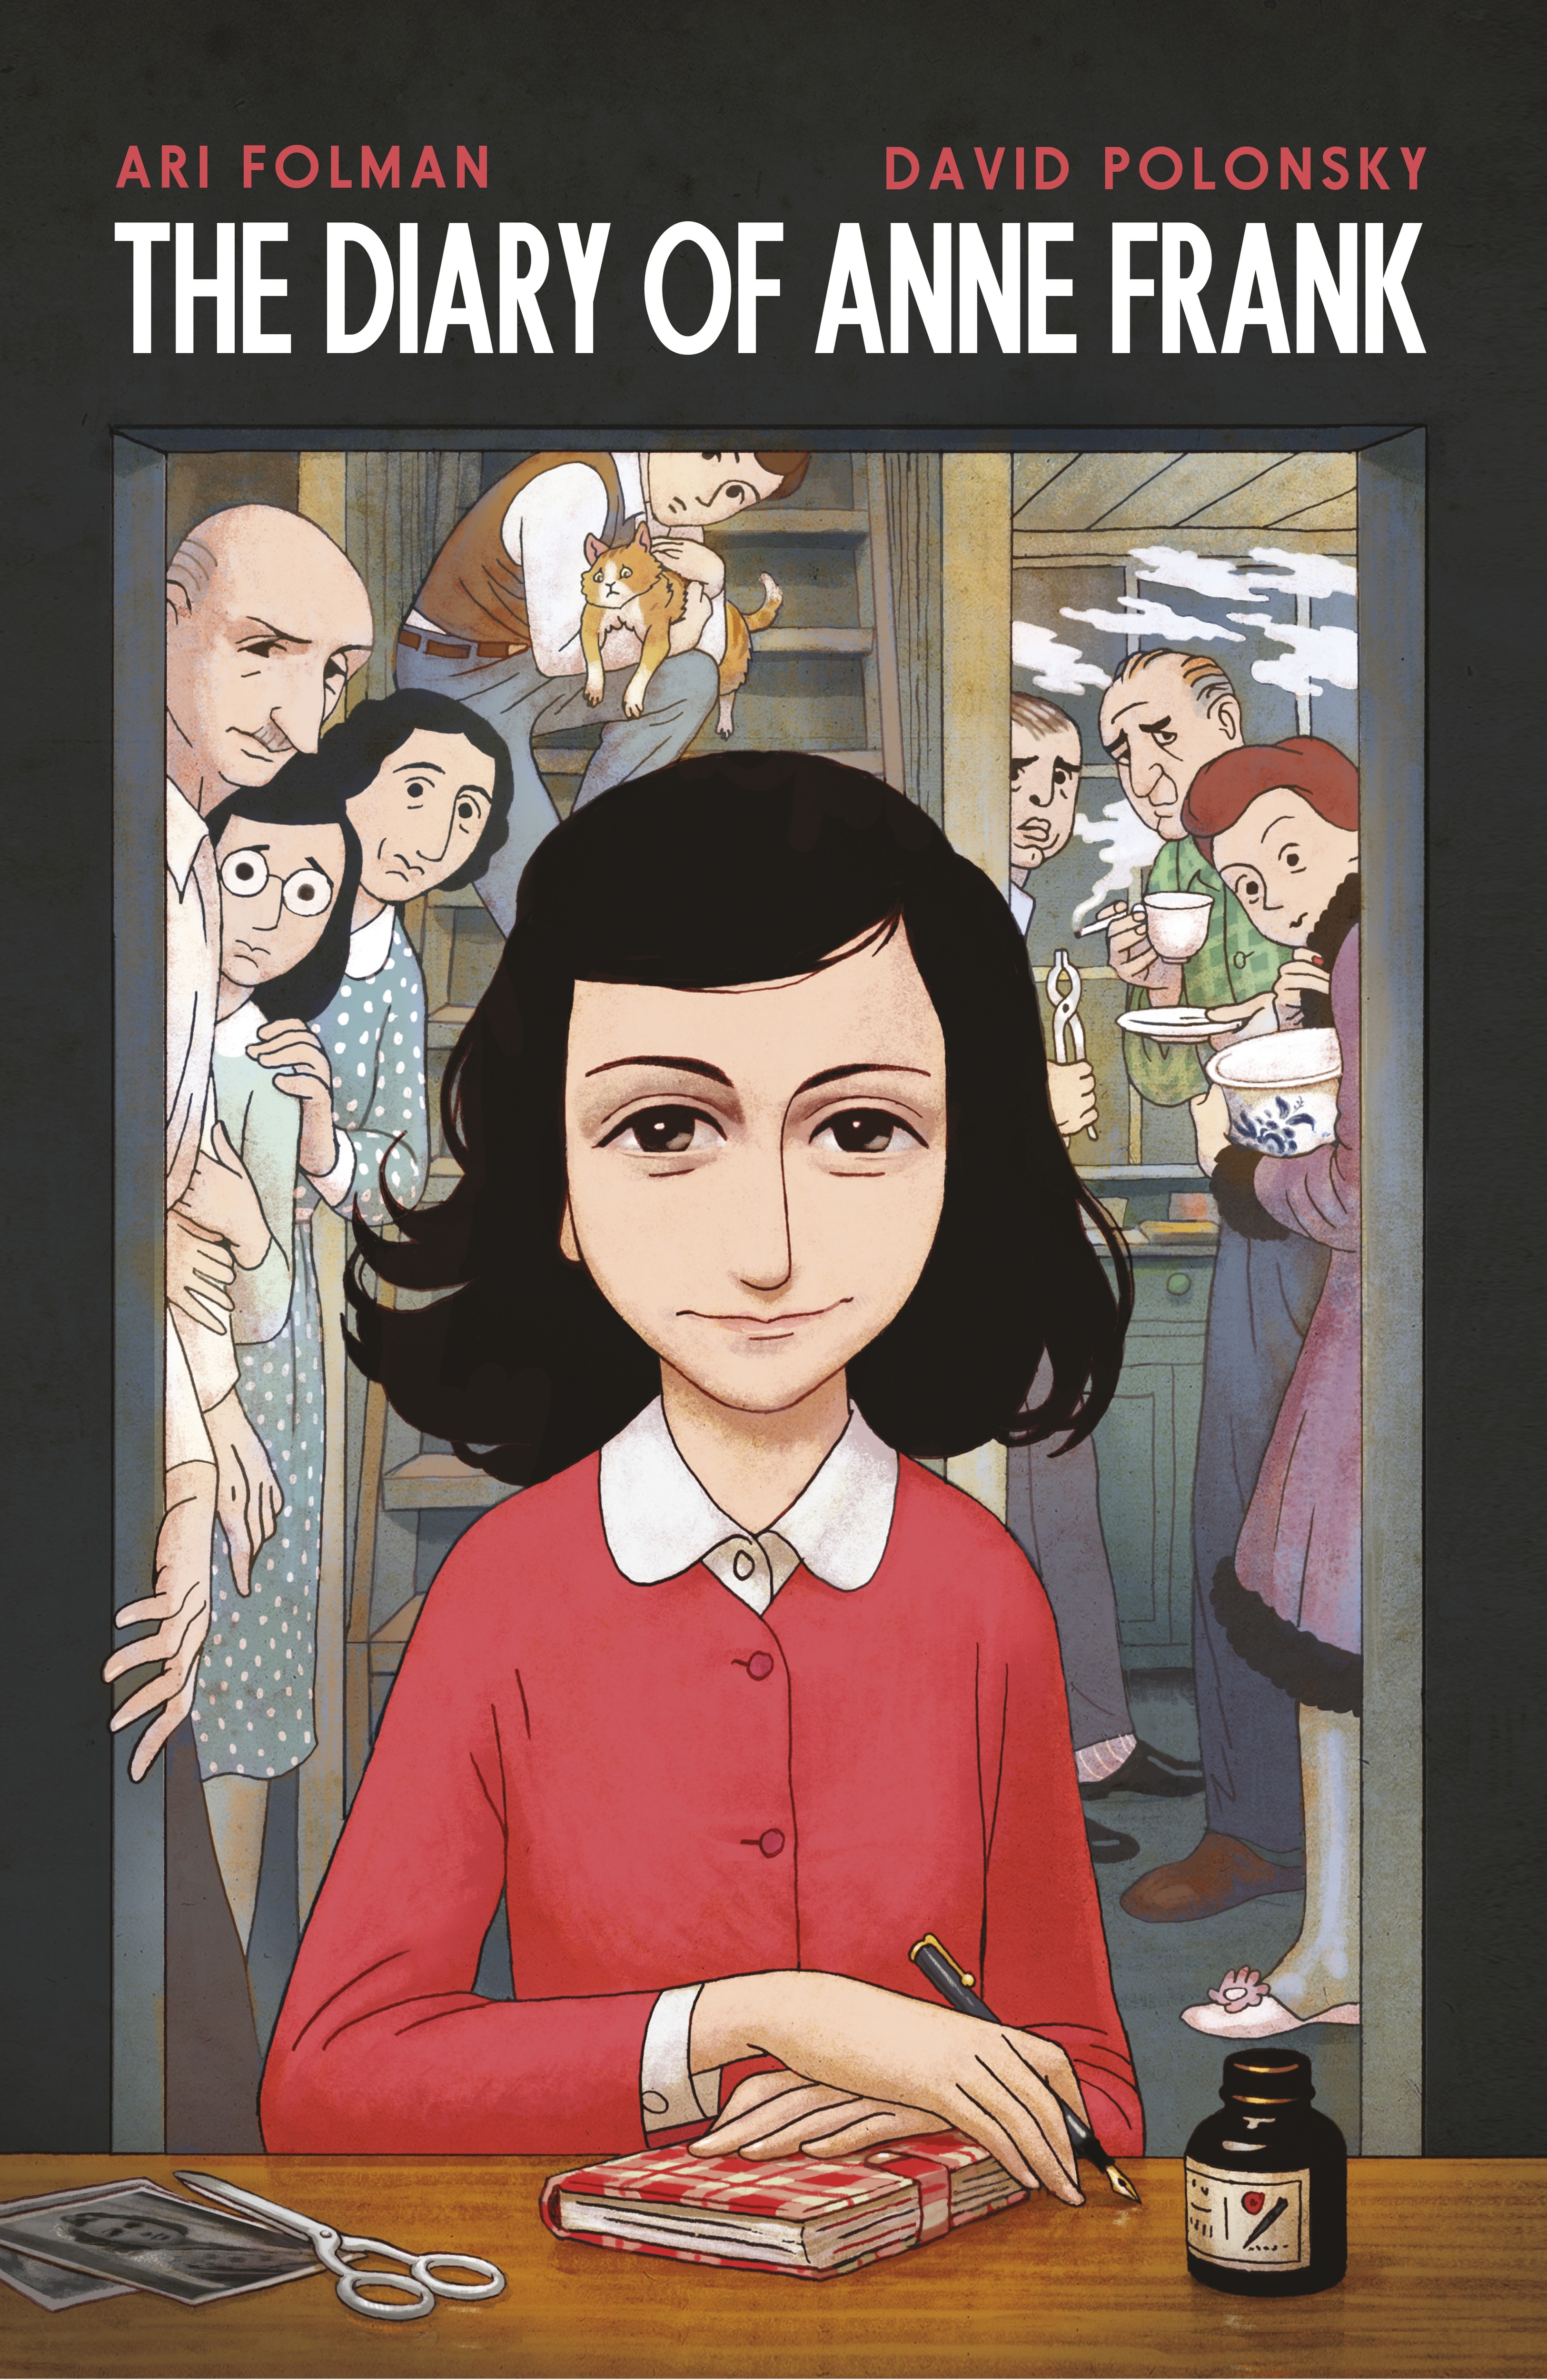 diary of anne frank graphic novel pdf free download